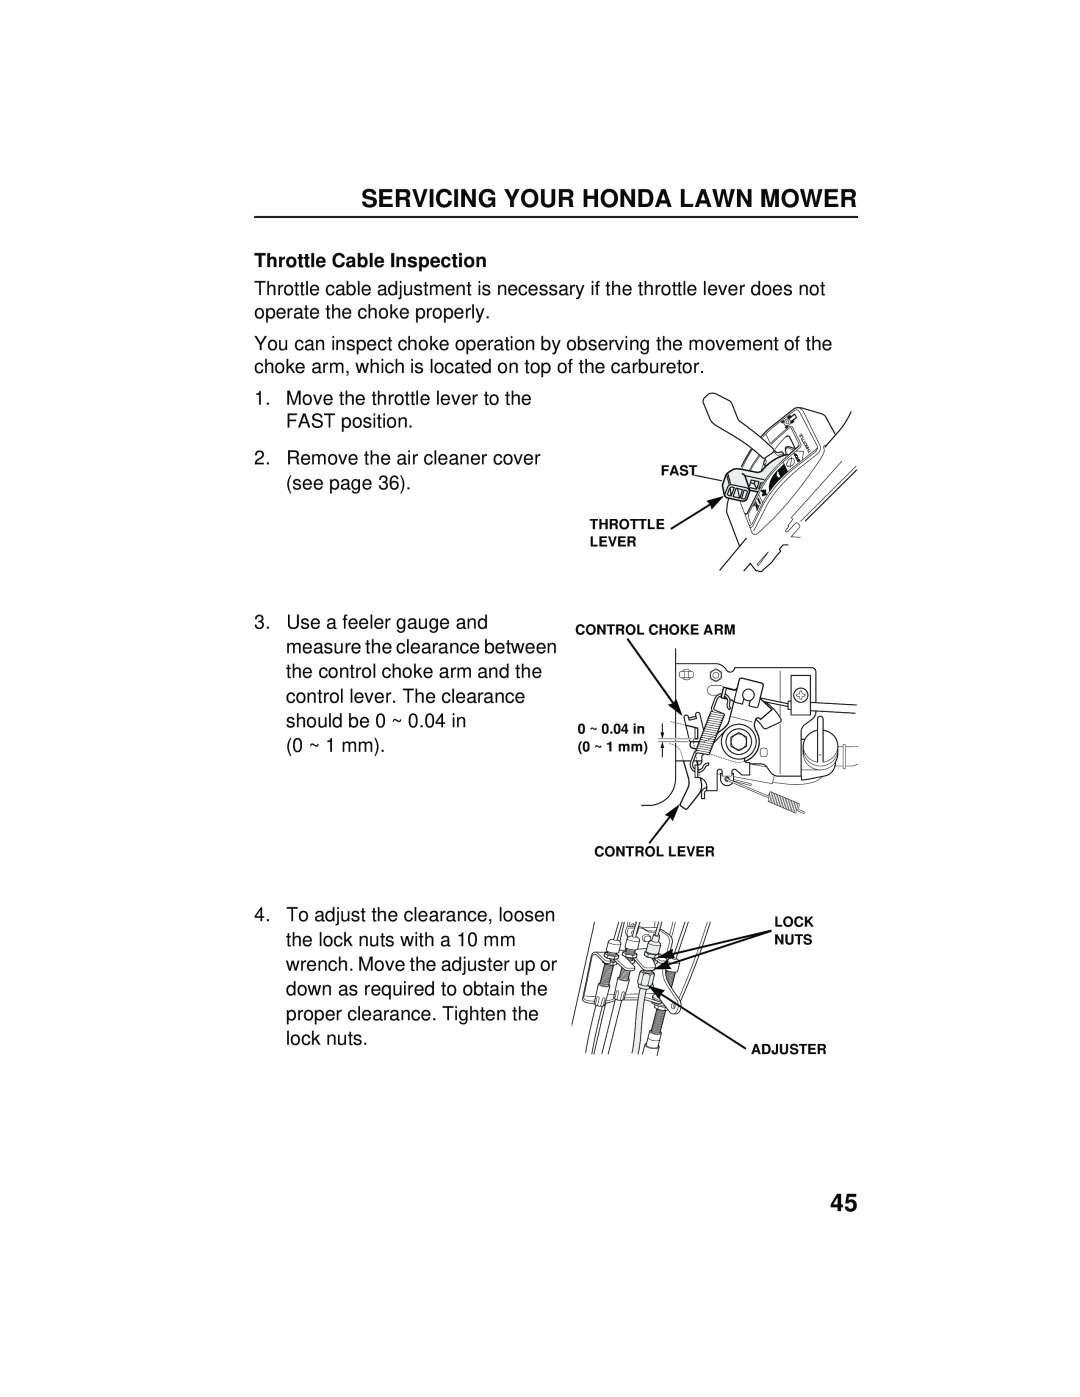 Honda Power Equipment HRB216TXA owner manual Throttle Cable Inspection, Servicing Your Honda Lawn Mower 